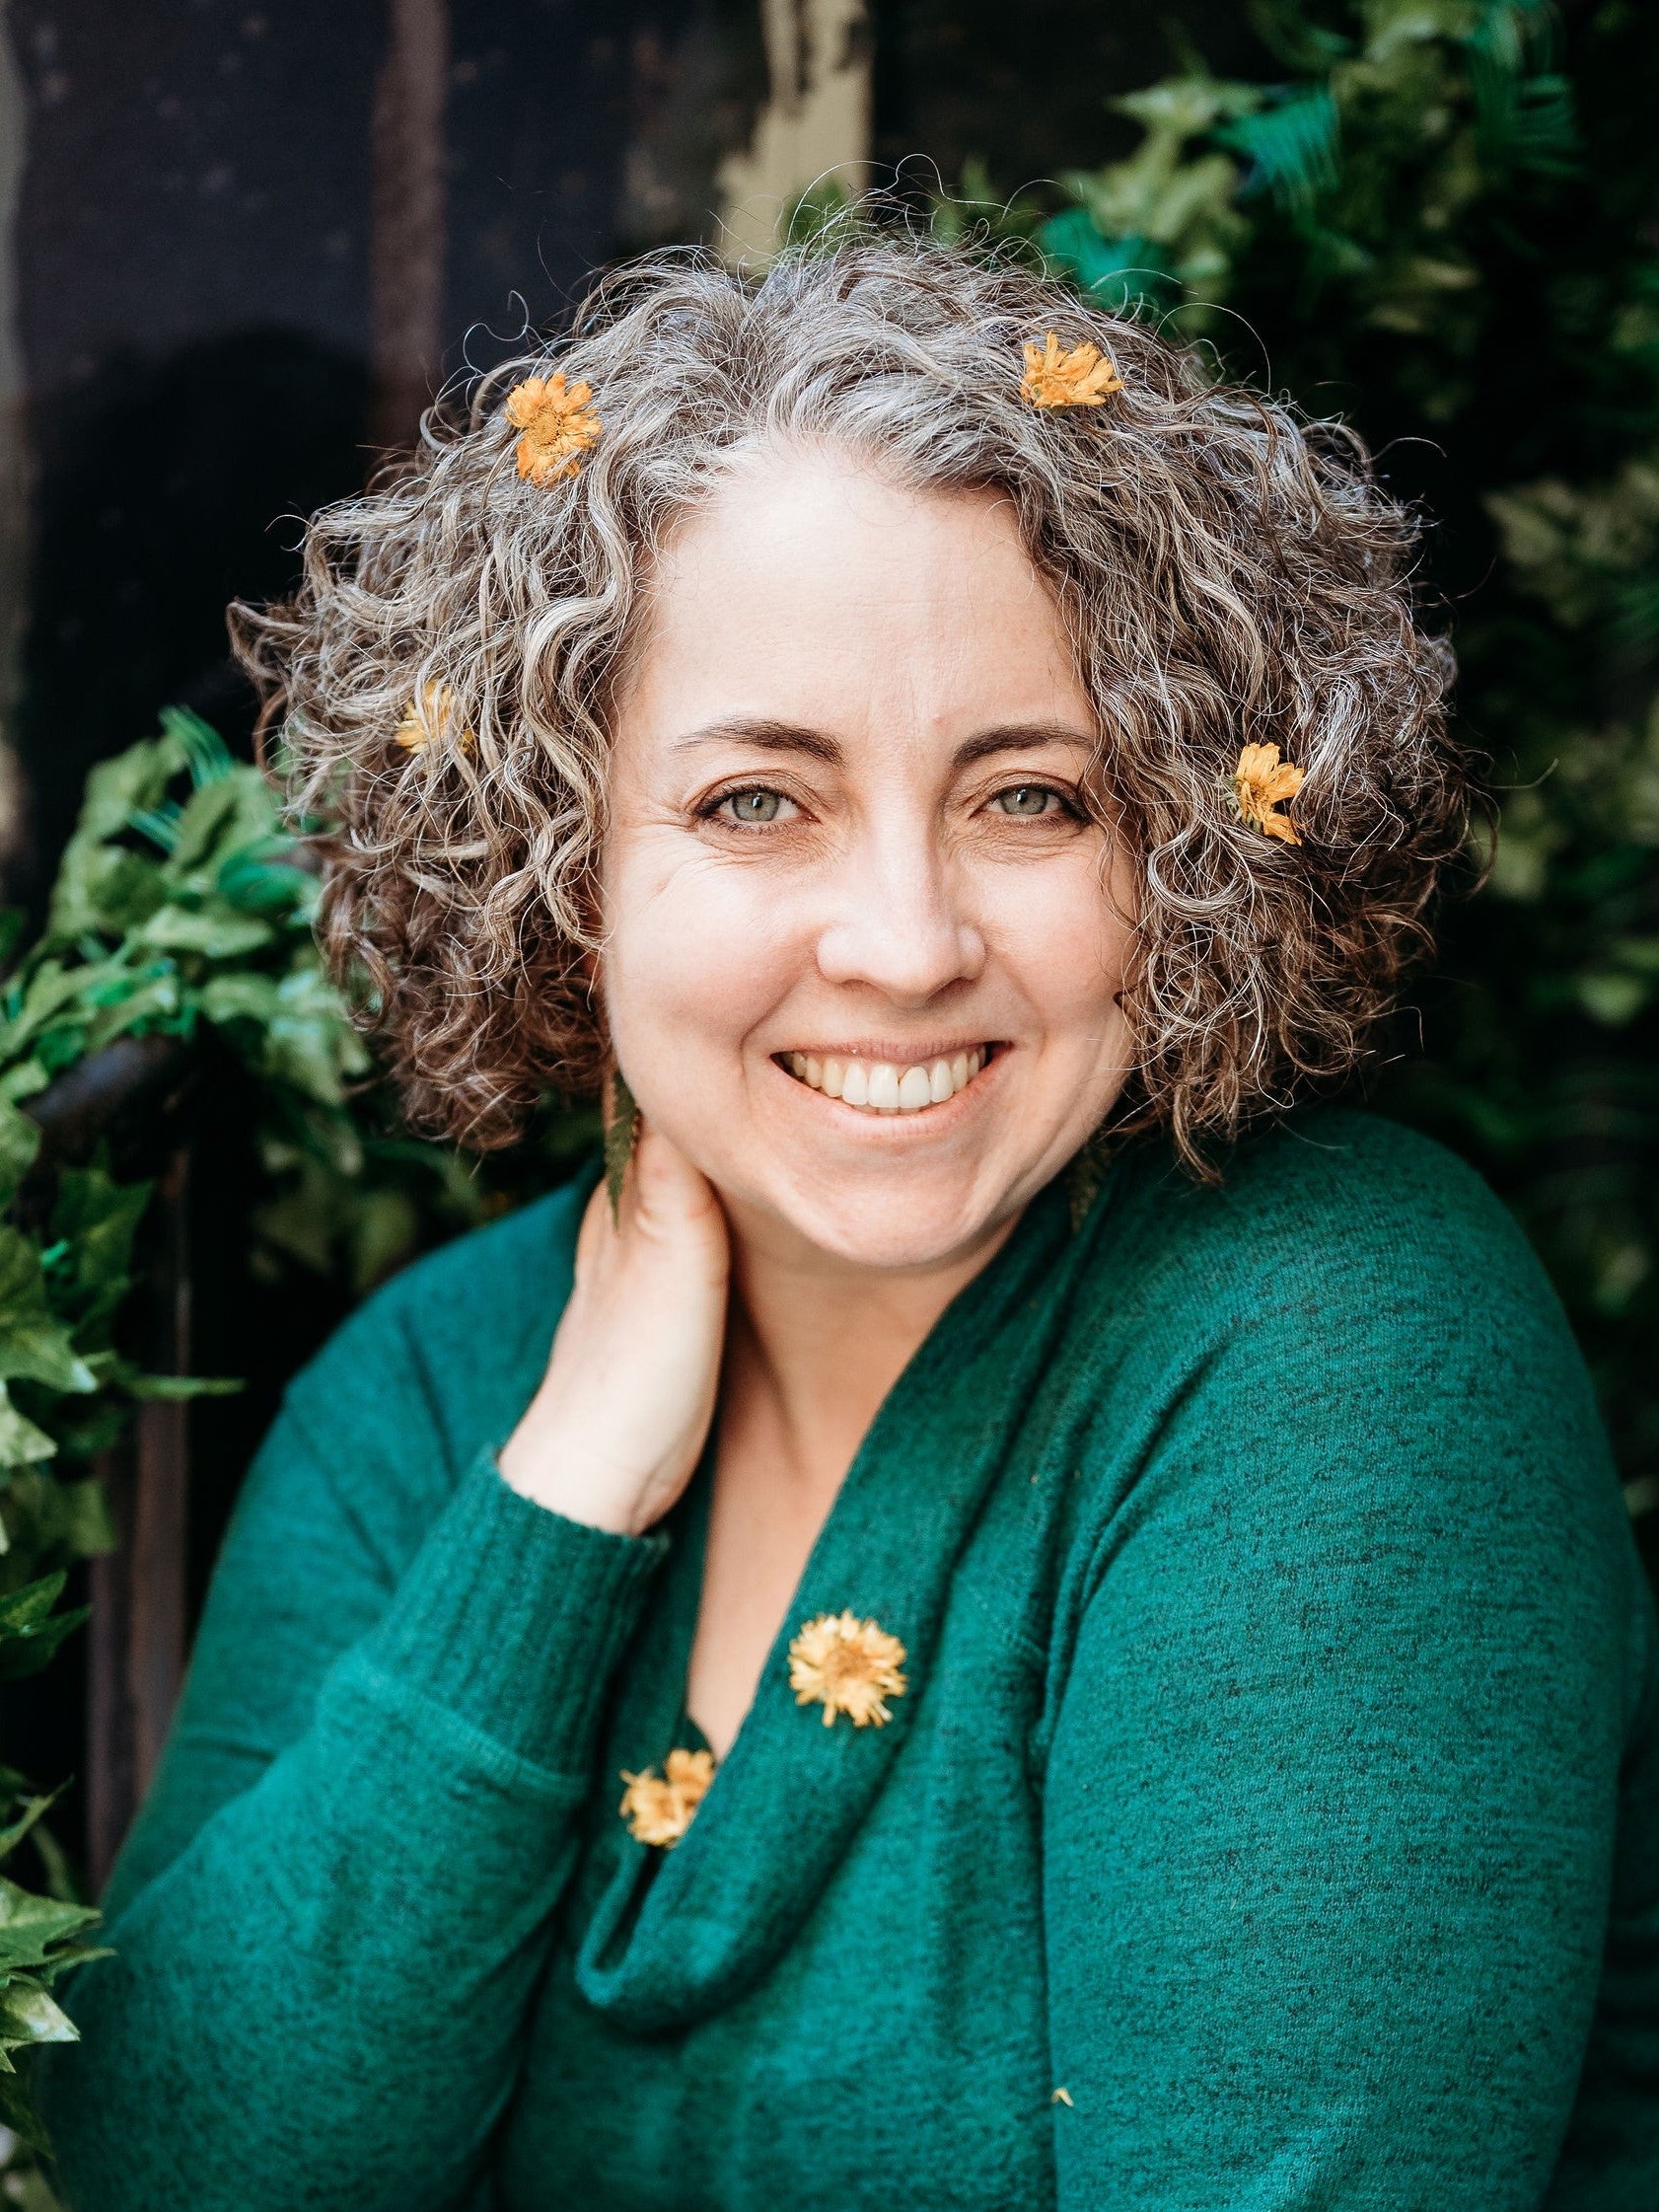 Portrait of the founder of Well Seasoned Table, Sarah Wickers. She is in a green shirt with orange flowers in her hair